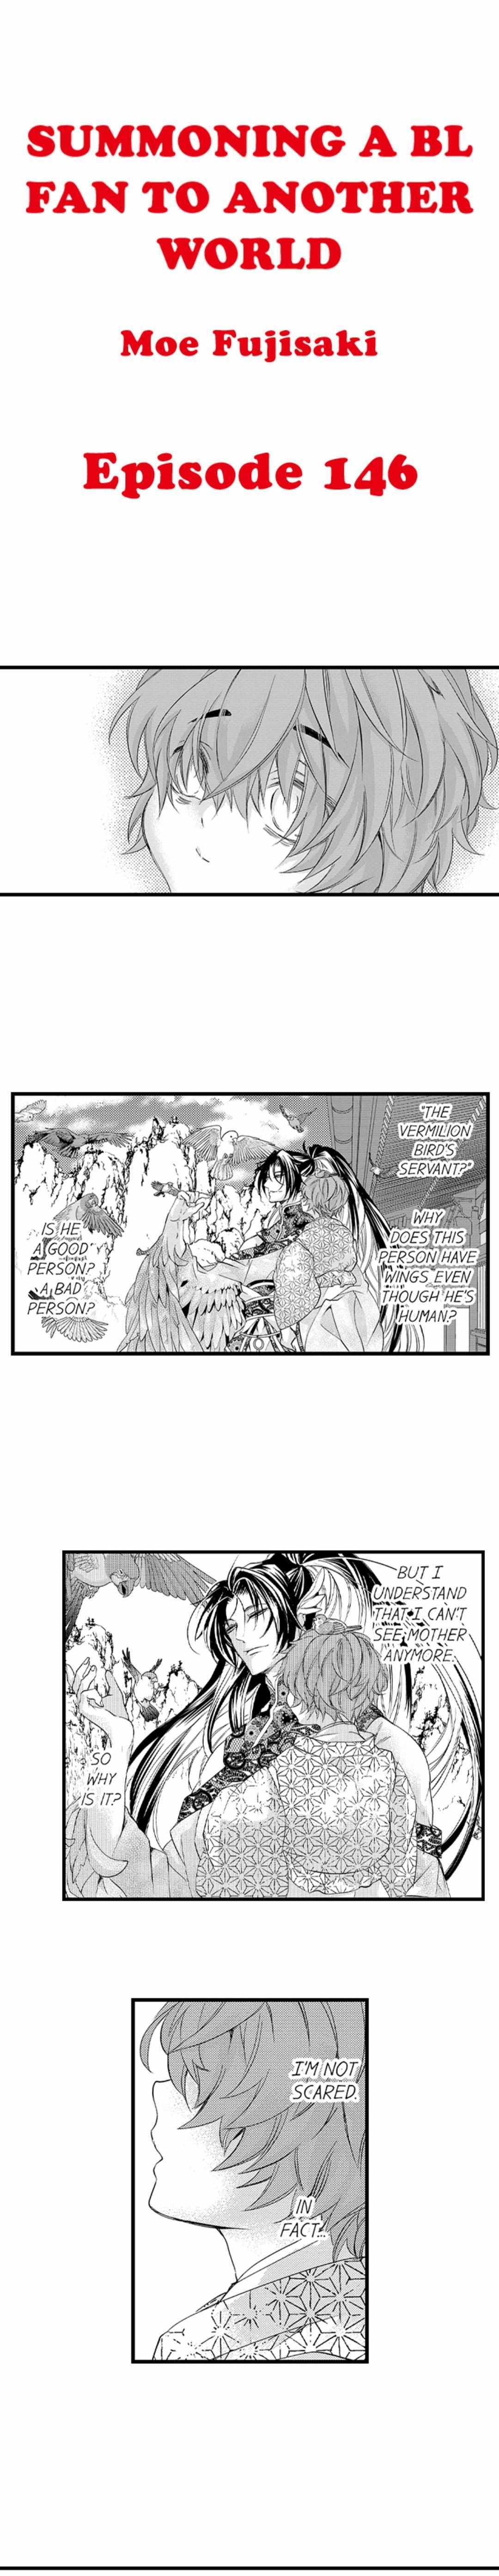 Fanboy Summoning Shafted By An Otherworldly Beast - chapter 146 - #4